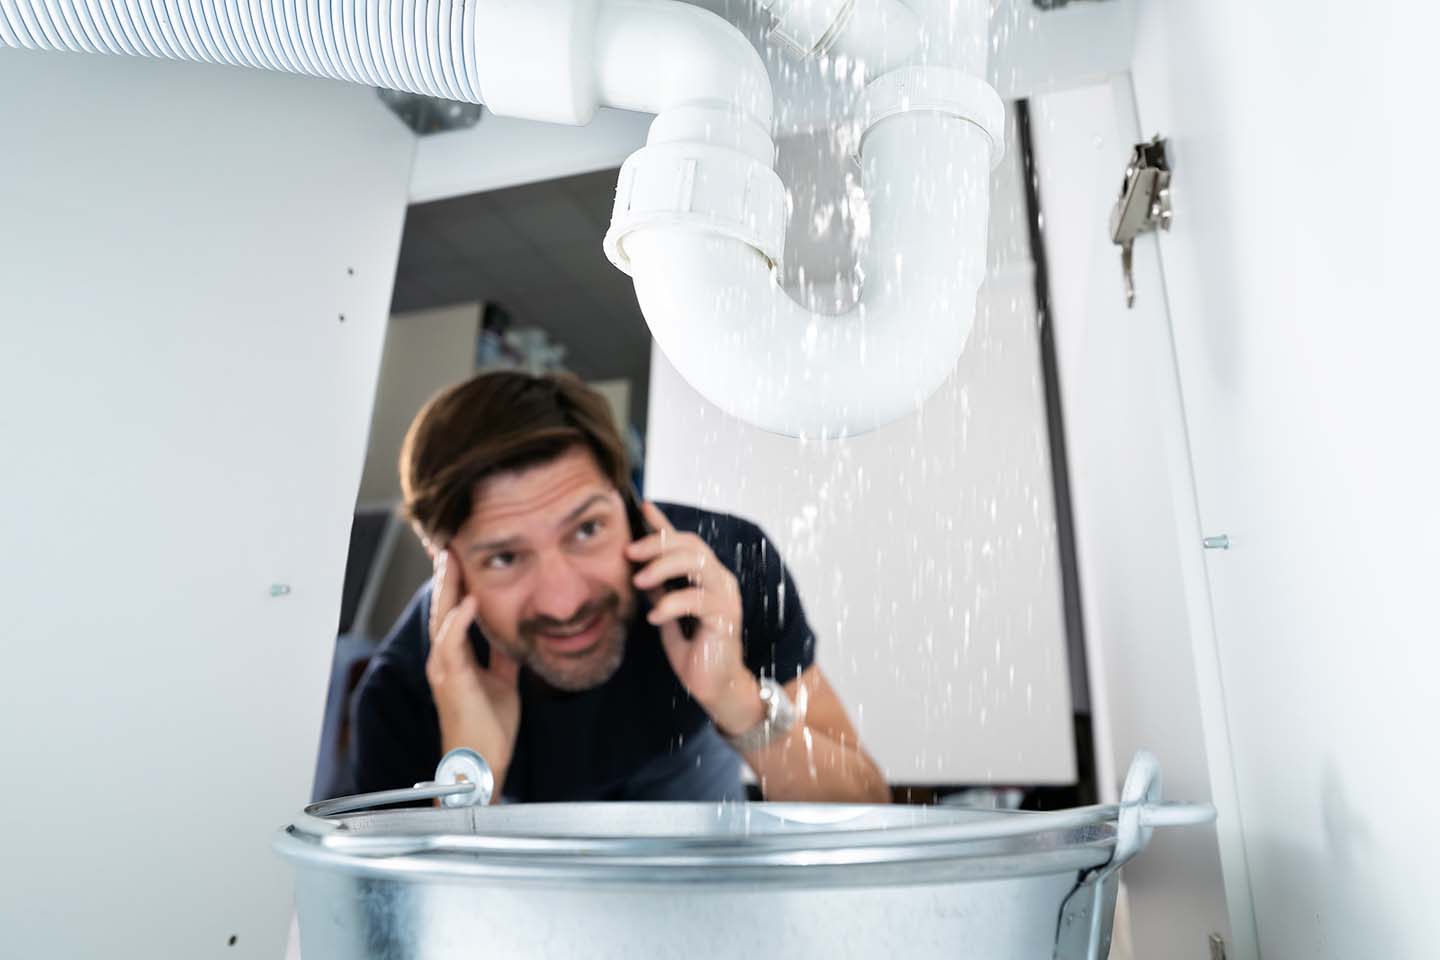 Don’t let it go!: Why not fixing leaks promptly is BAD